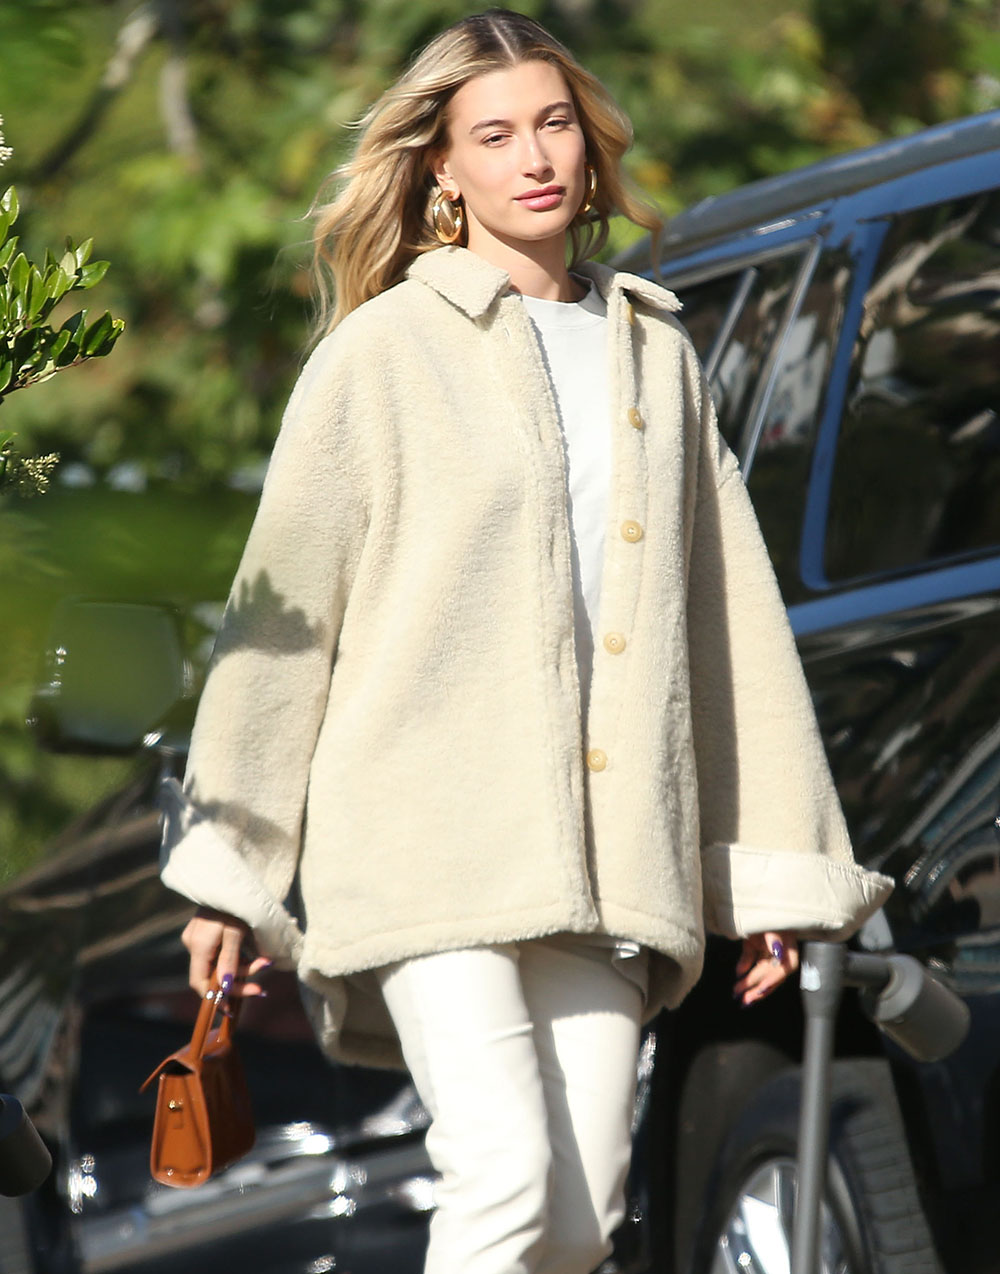 See Hailey Bieber Wear a Chic Shearling Jacket While Shopping with